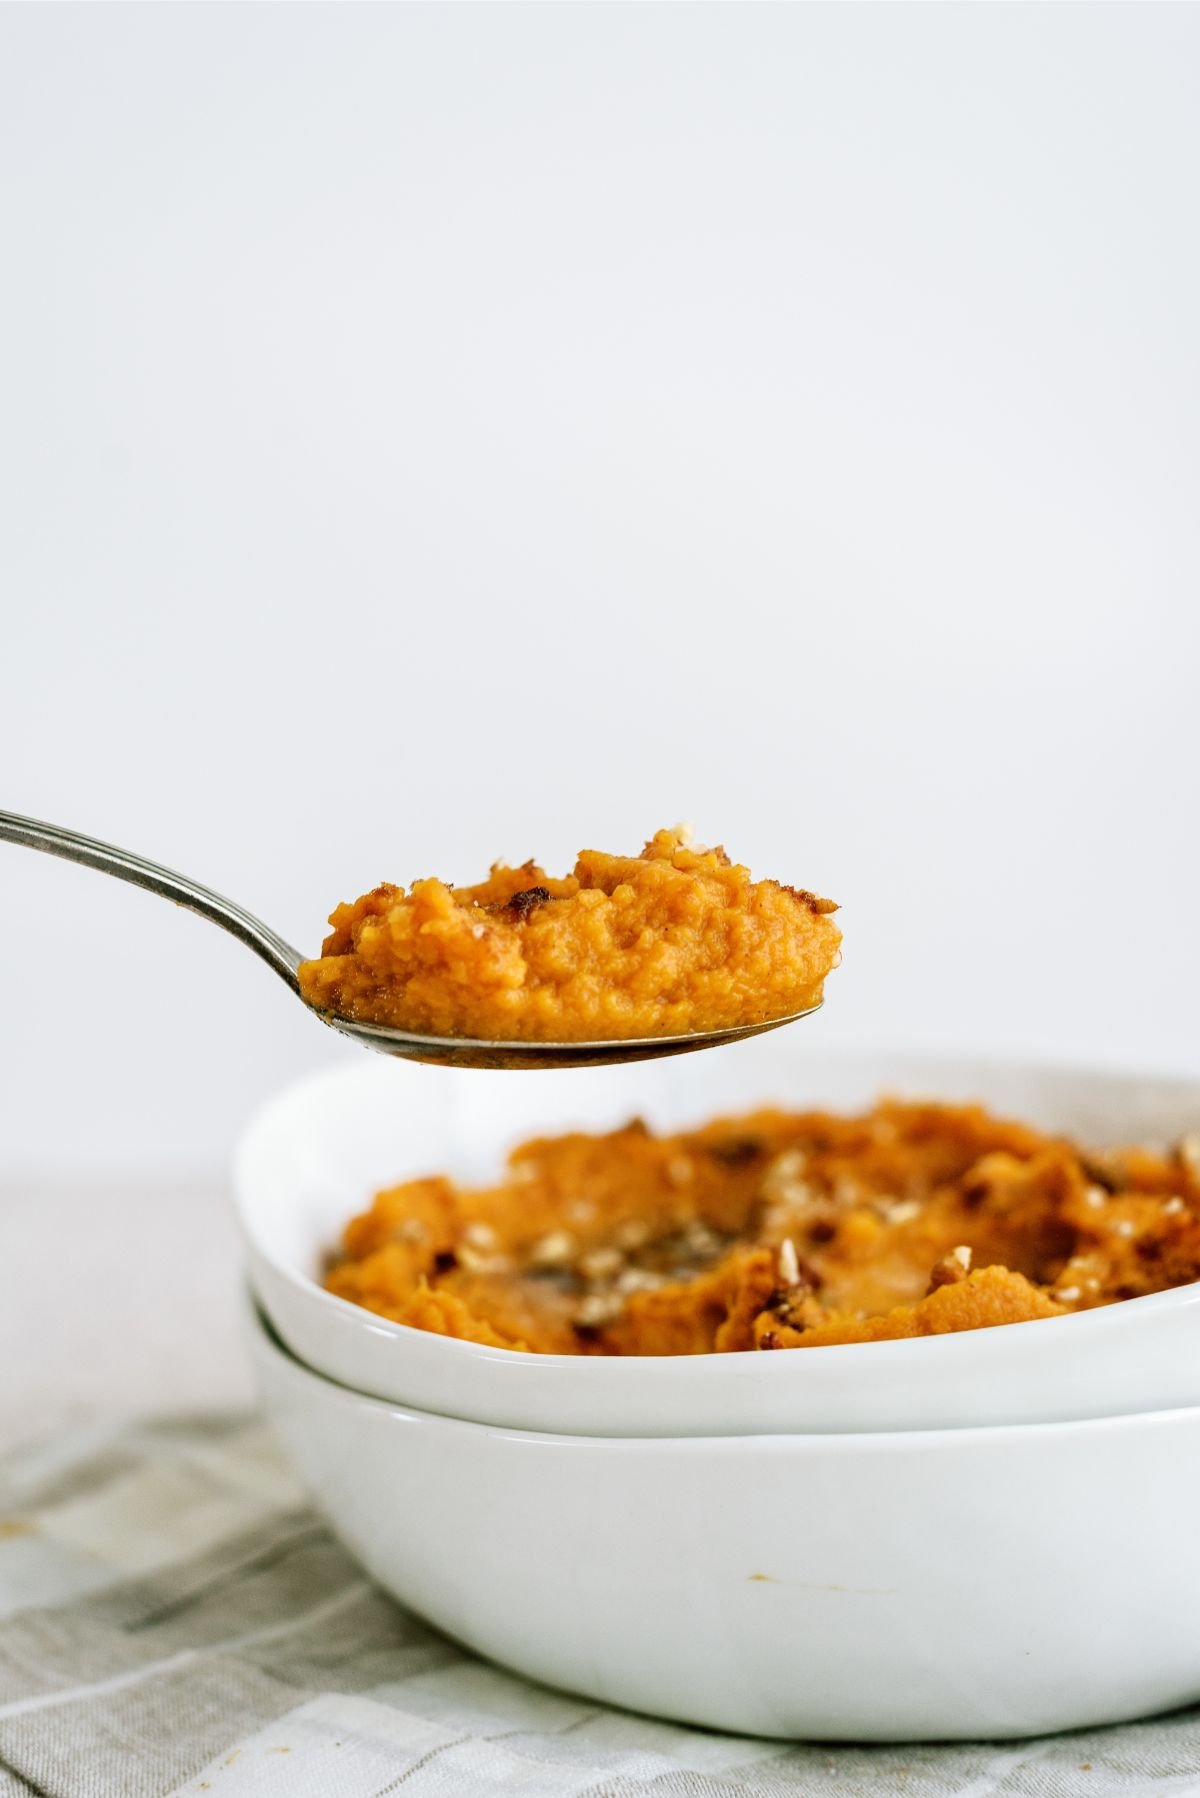 A bowl of Mashed Sweet Potatoes with a spoonful